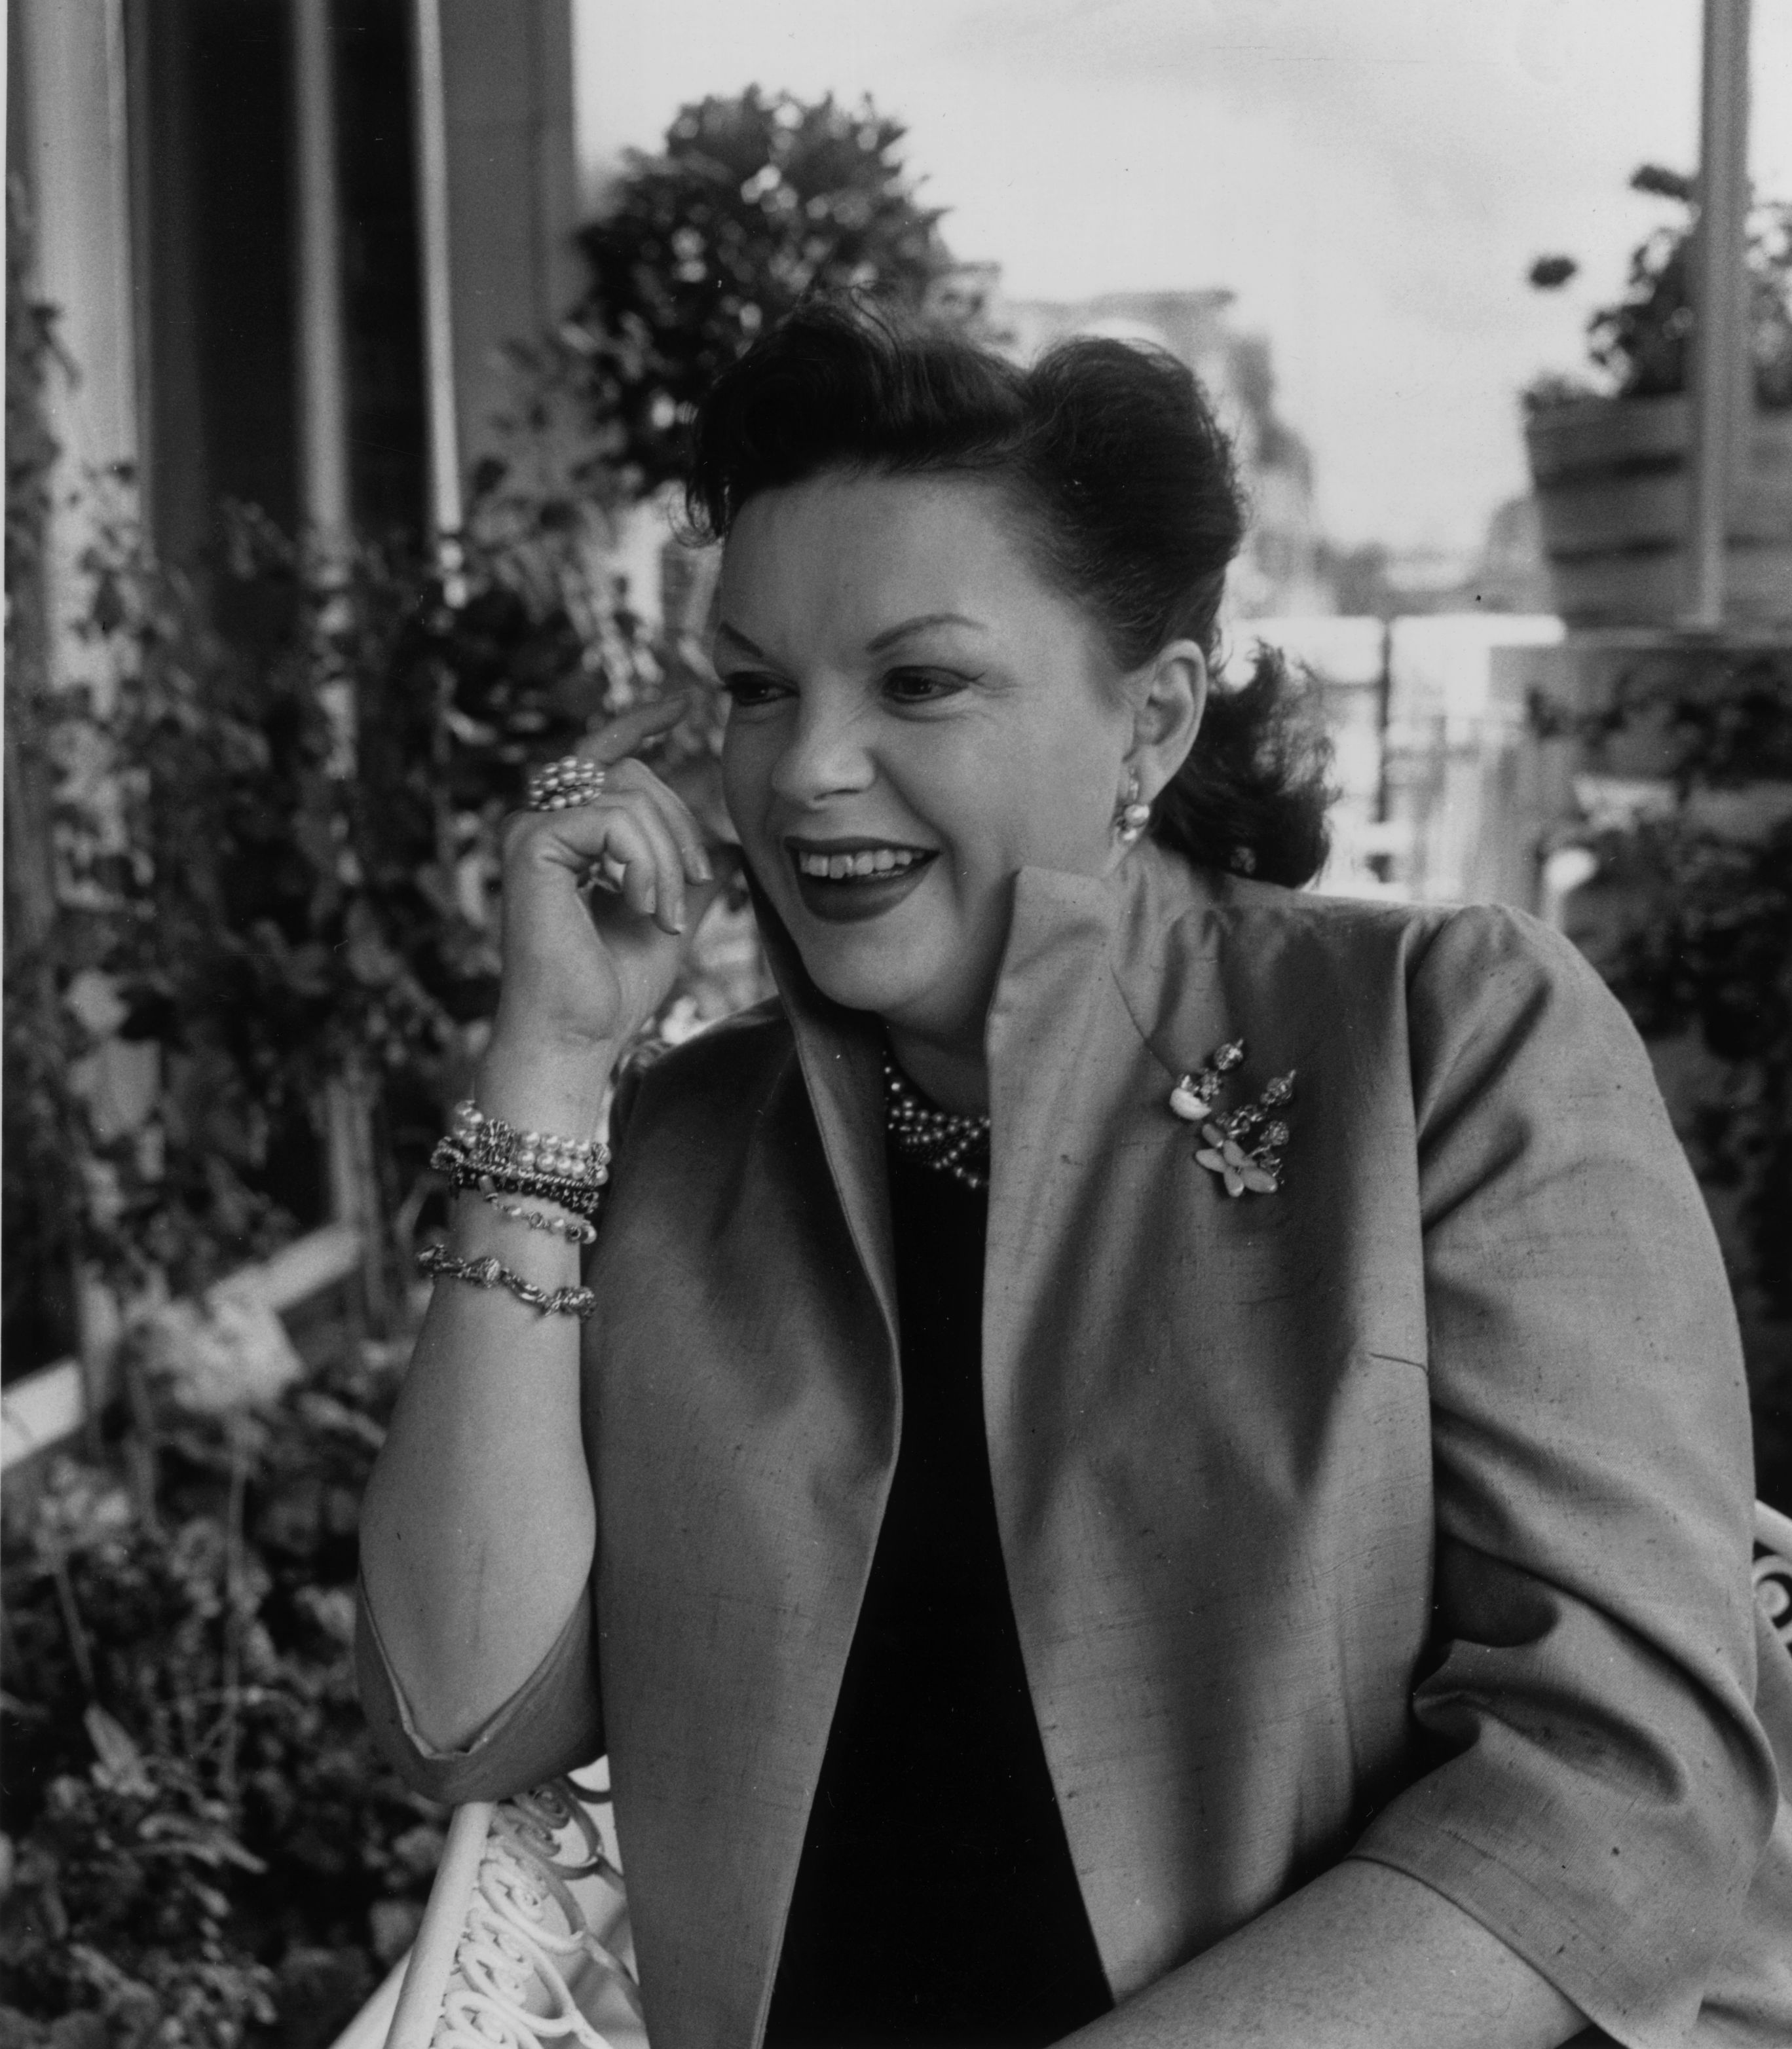 Judy Garland (1922 - 1969) at the Mayfair Hotel, London on August 29, 1960. | Source: Getty Images